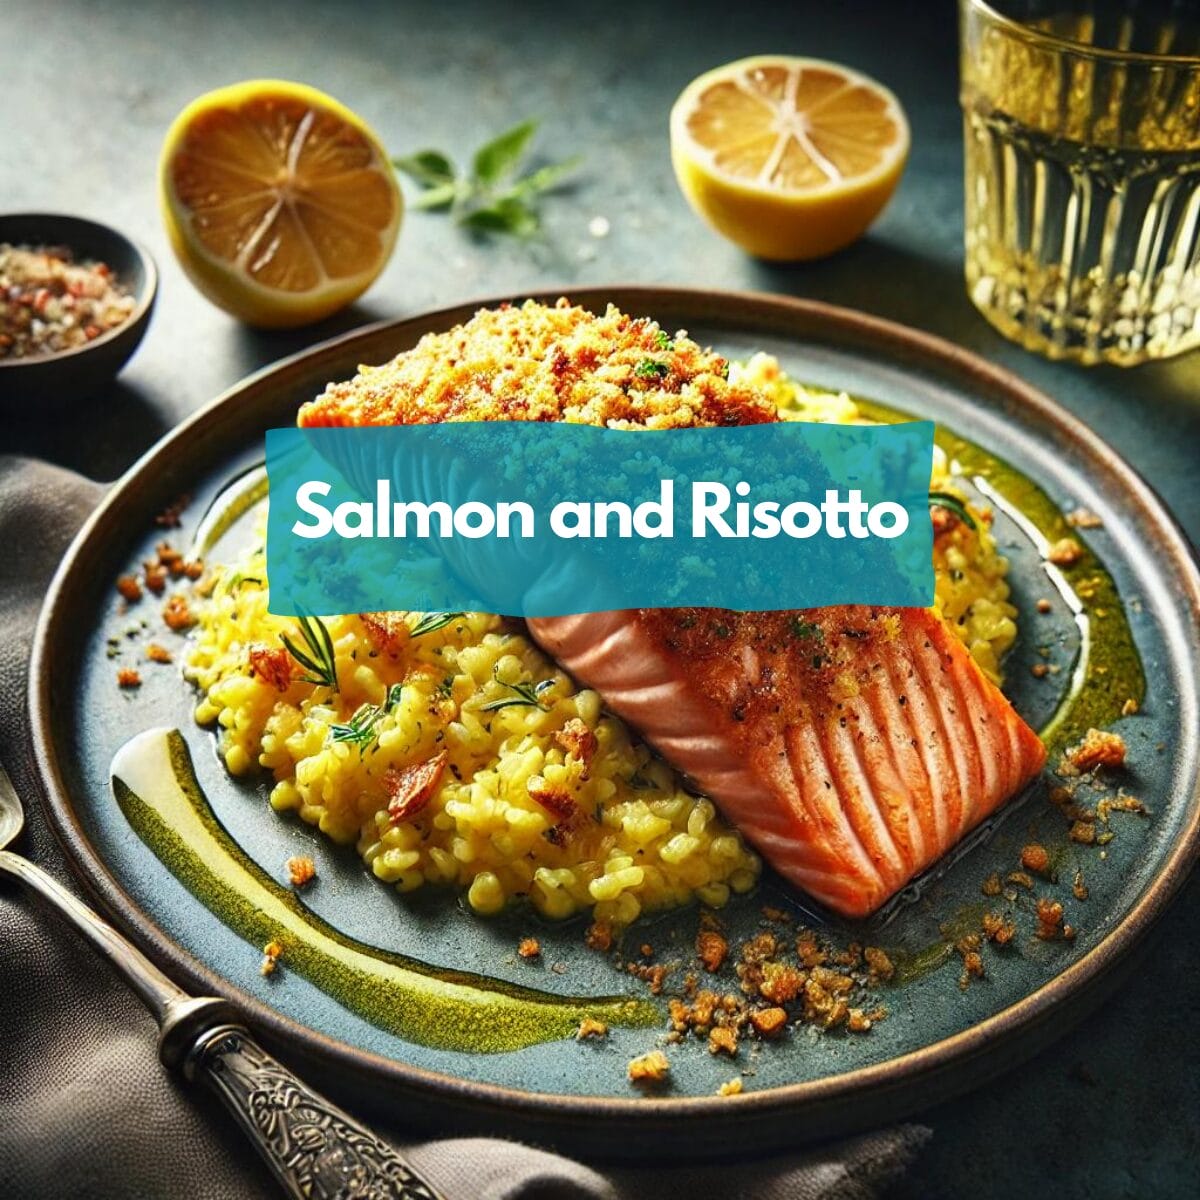 Salmon and Risotto